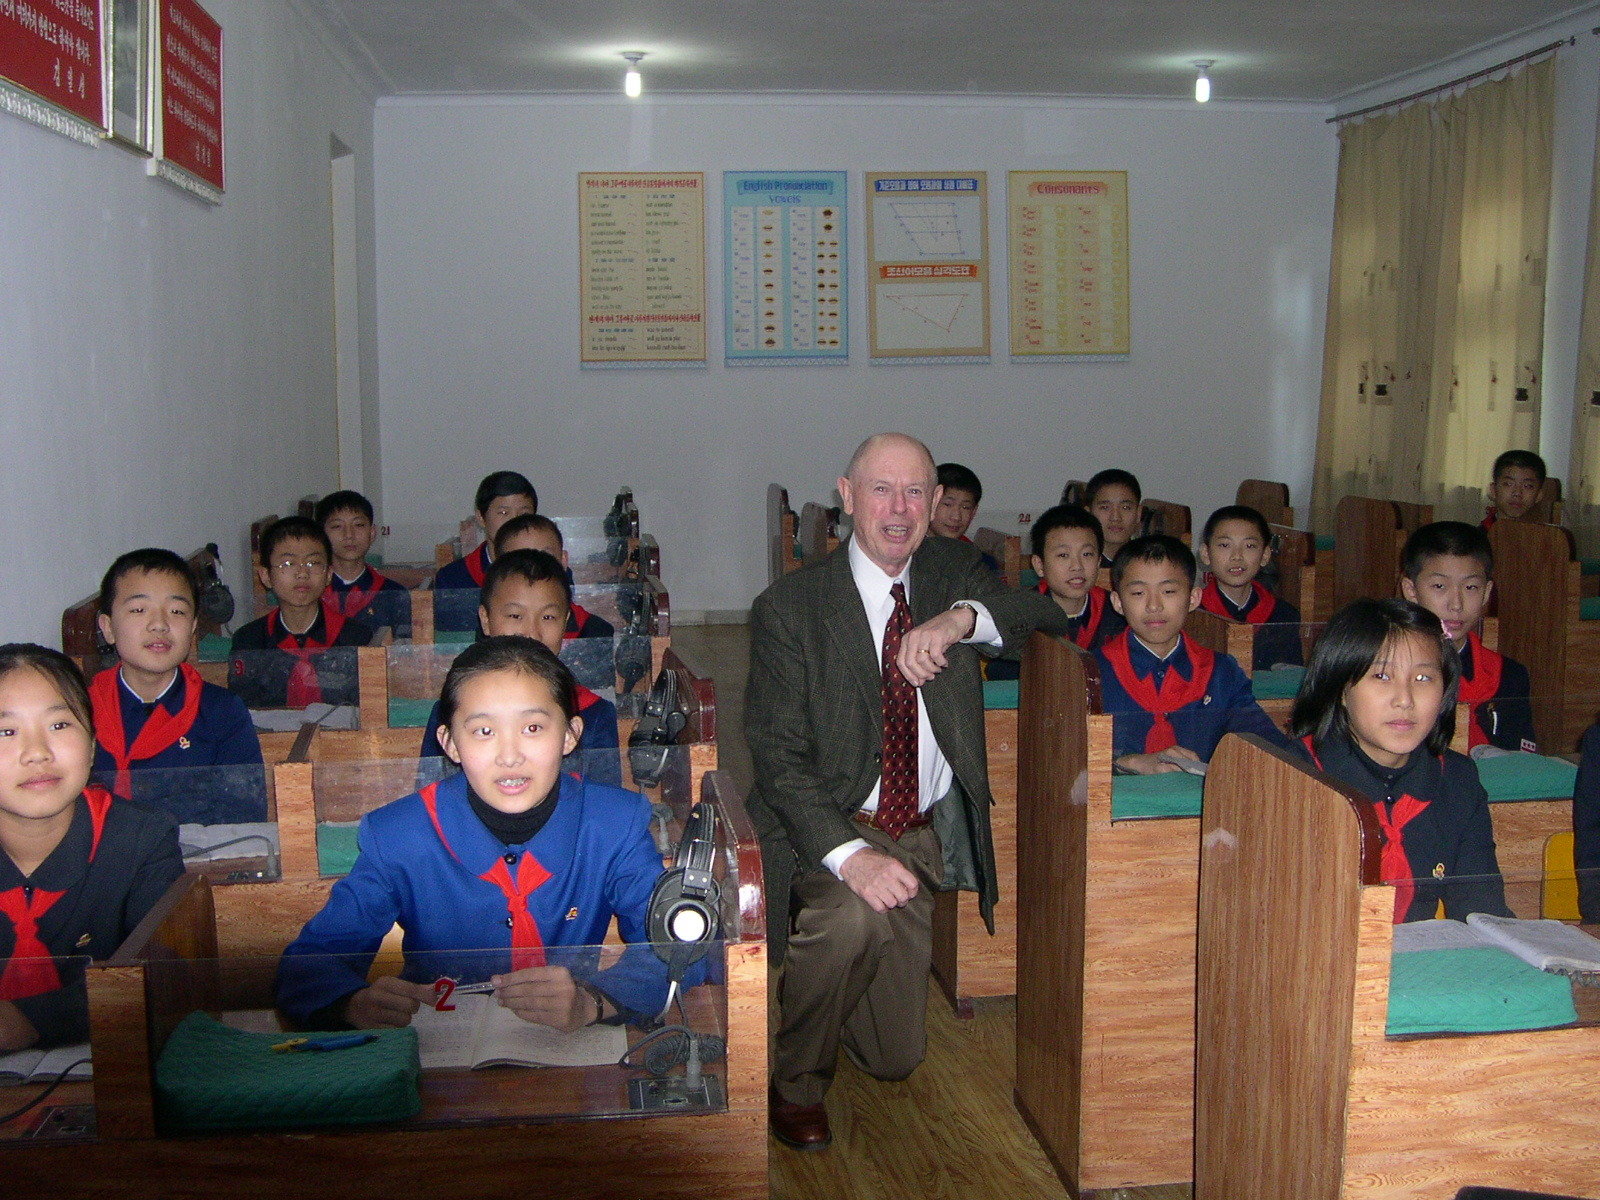 Man kneeling next to school desks with students sitting in pairs